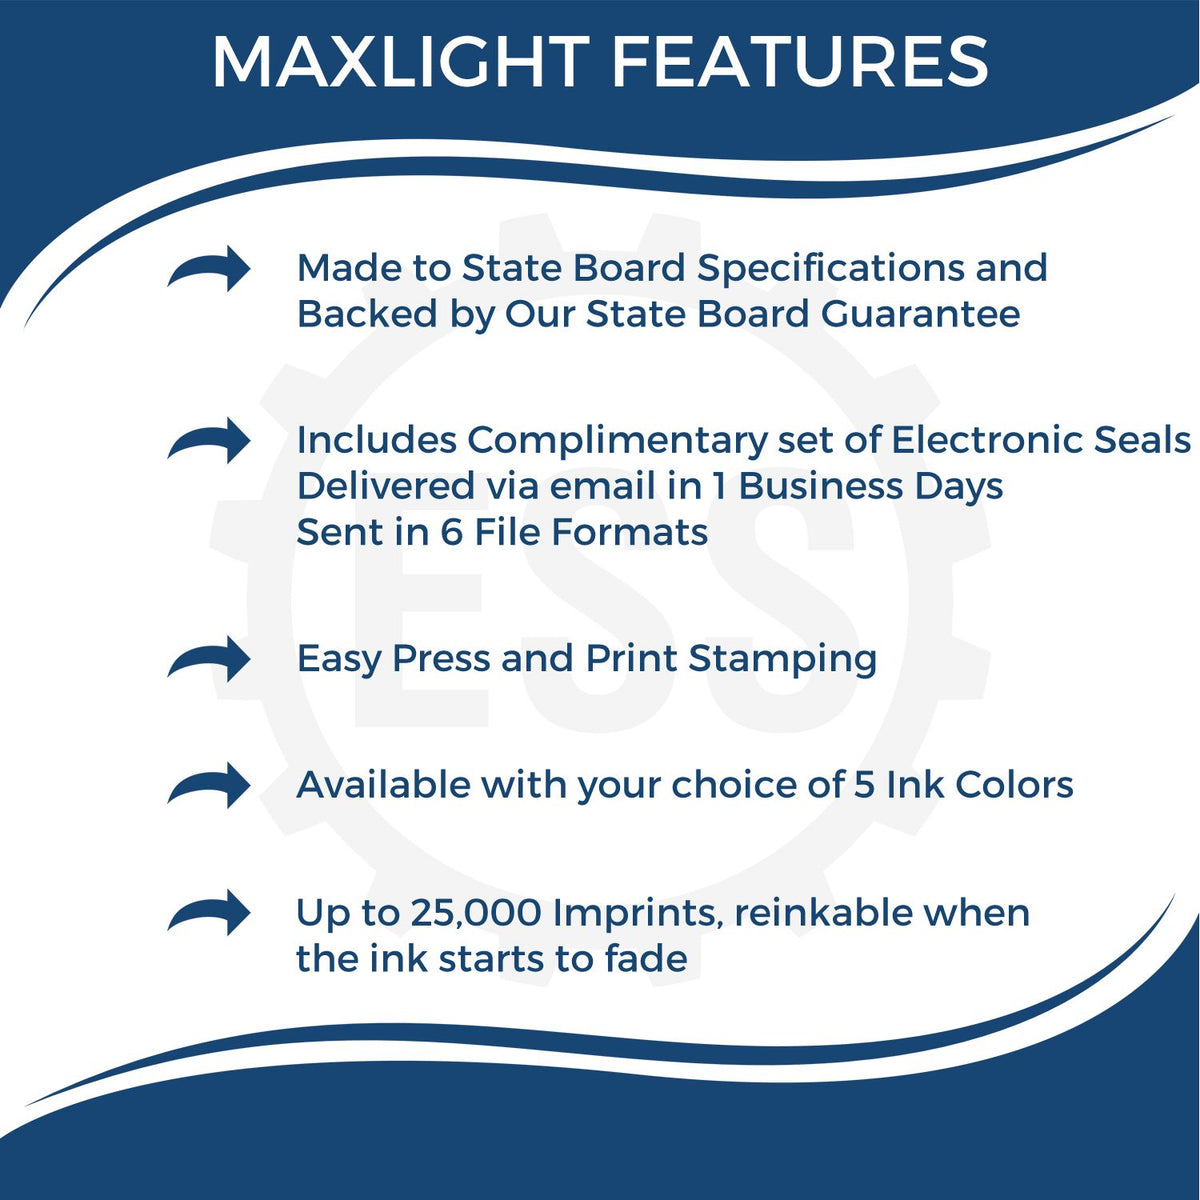 A picture of an infographic highlighting the selling points for the Premium MaxLight Pre-Inked Texas Geology Stamp